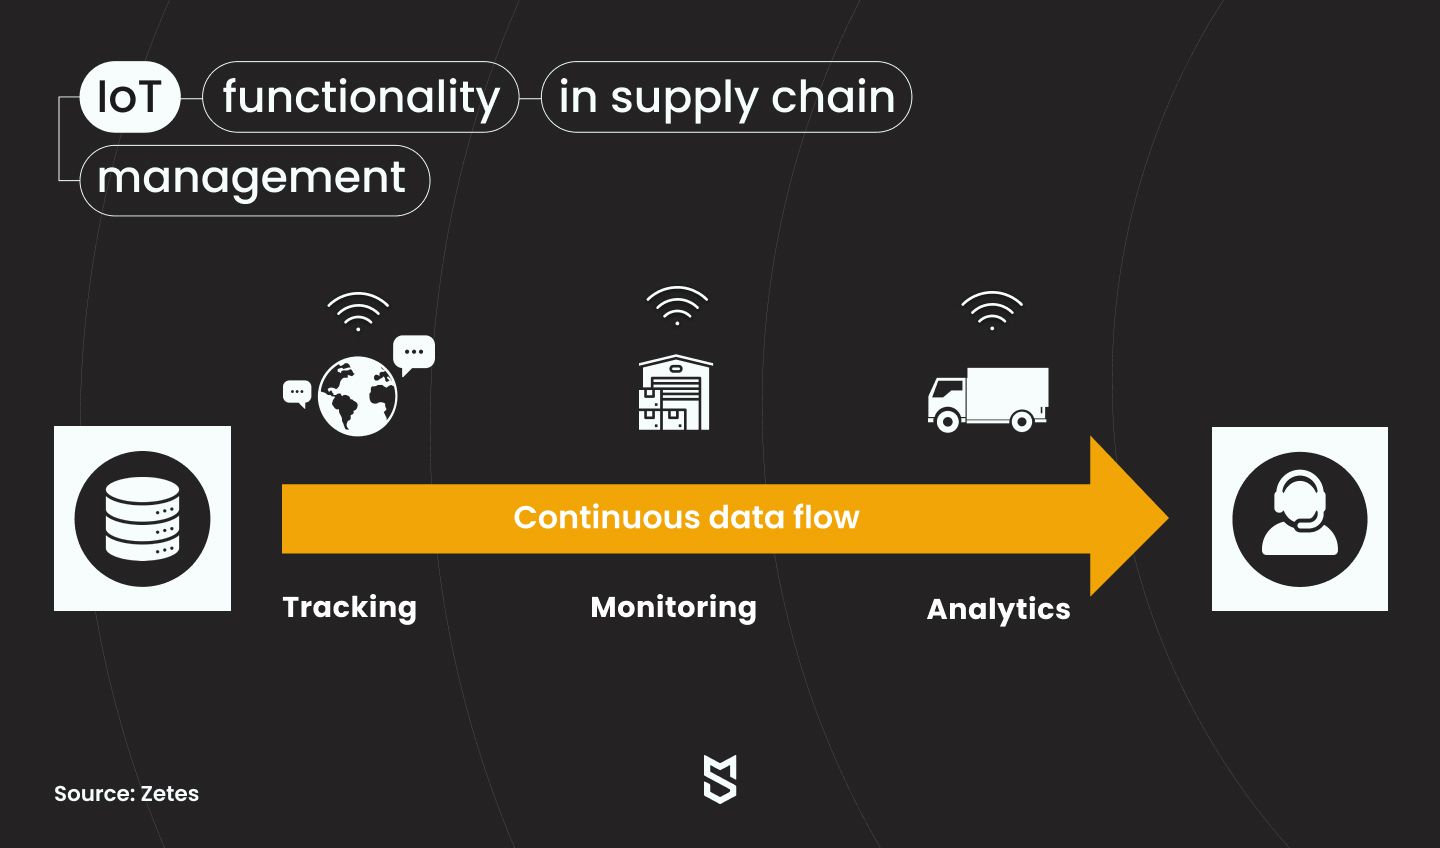  IoT functionality in supply chain management